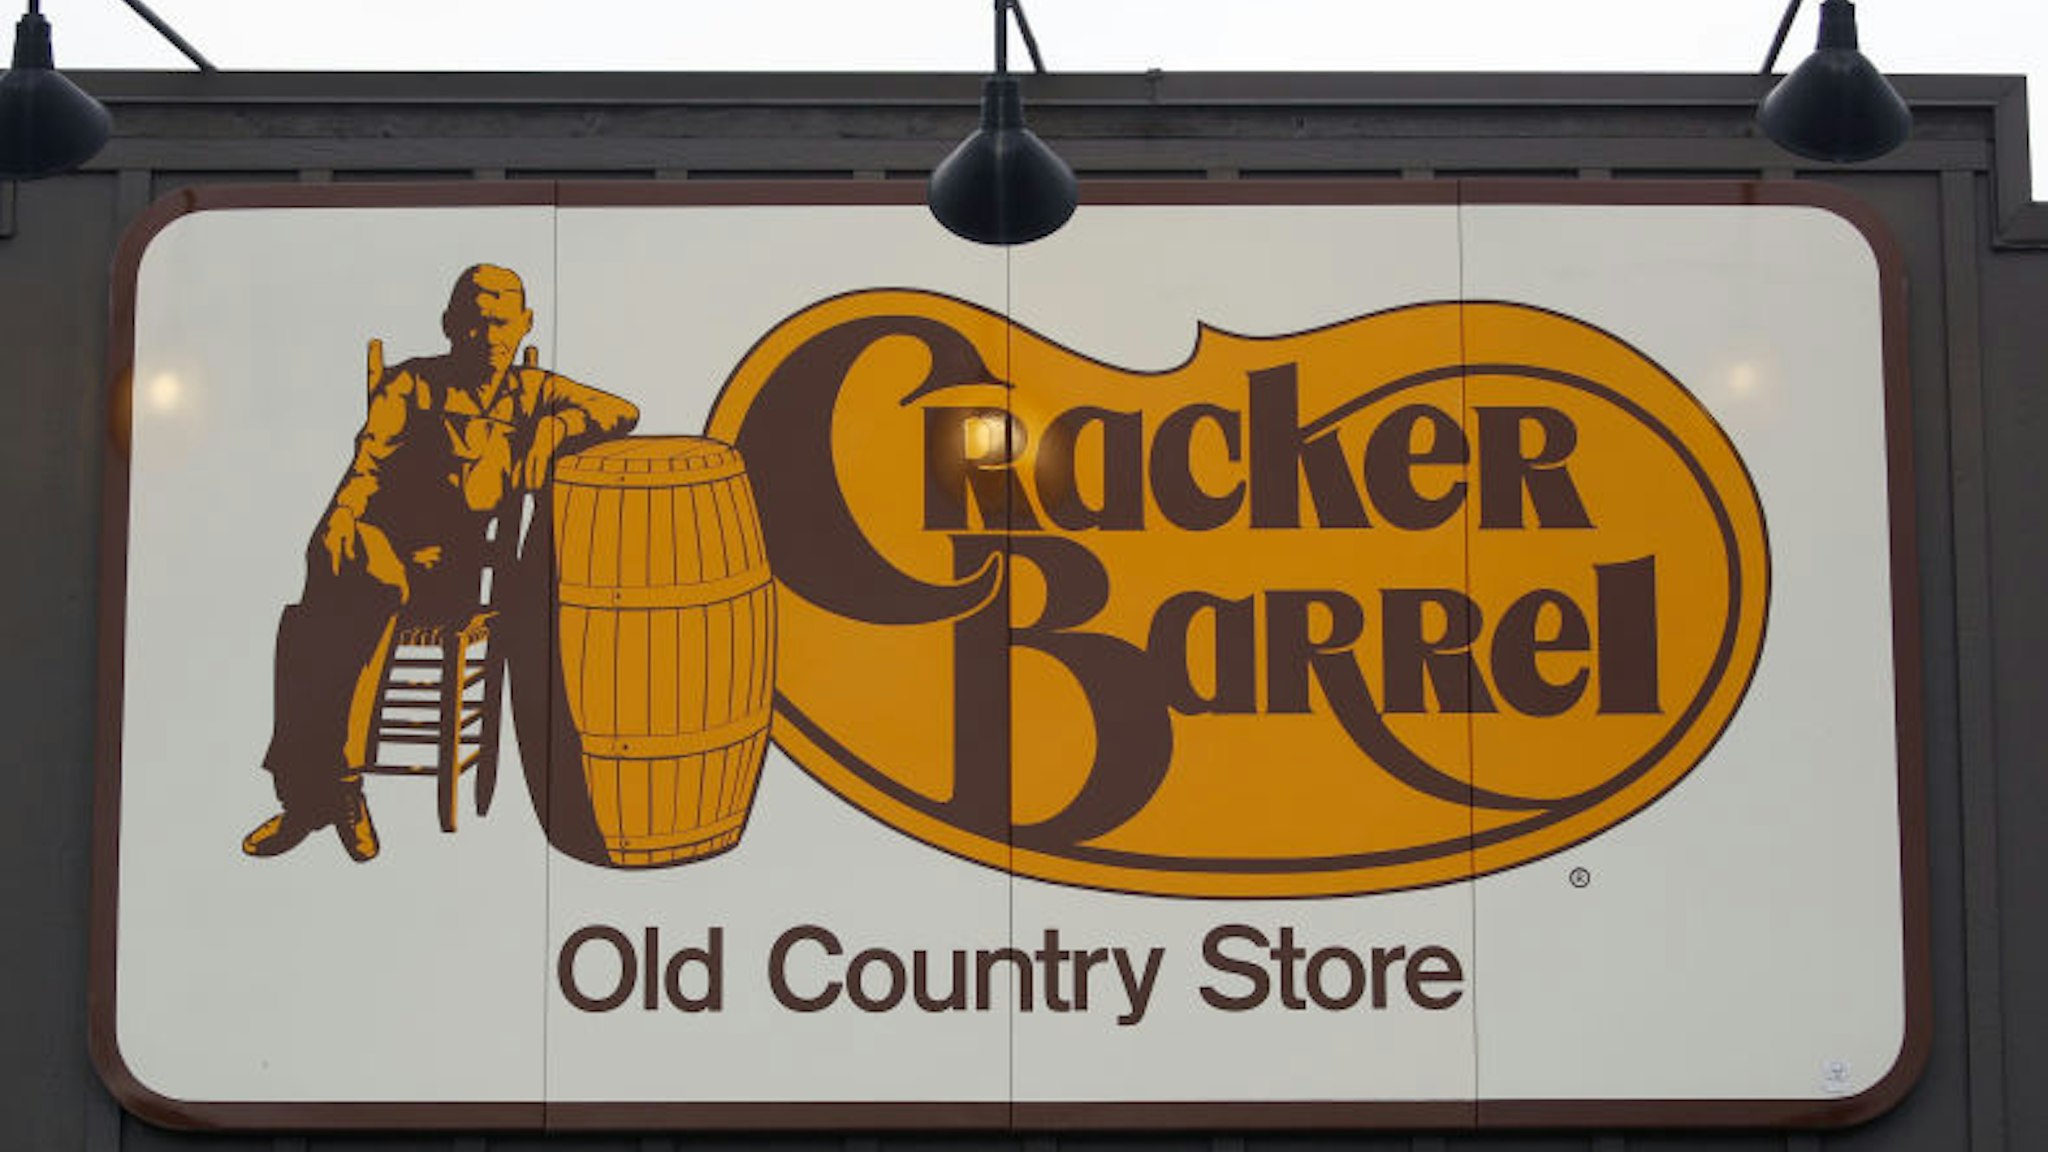 Signage is displayed outside a Cracker Barrel Old Country Store Inc. restaurant and gift shop in Louisville, Kentucky, U.S., on Monday, Sept. 23, 2019. Cracker Barrel is scheduled to release earnings figures on November 26. Photographer: Luke Sharrett/Bloomberg via Getty Images